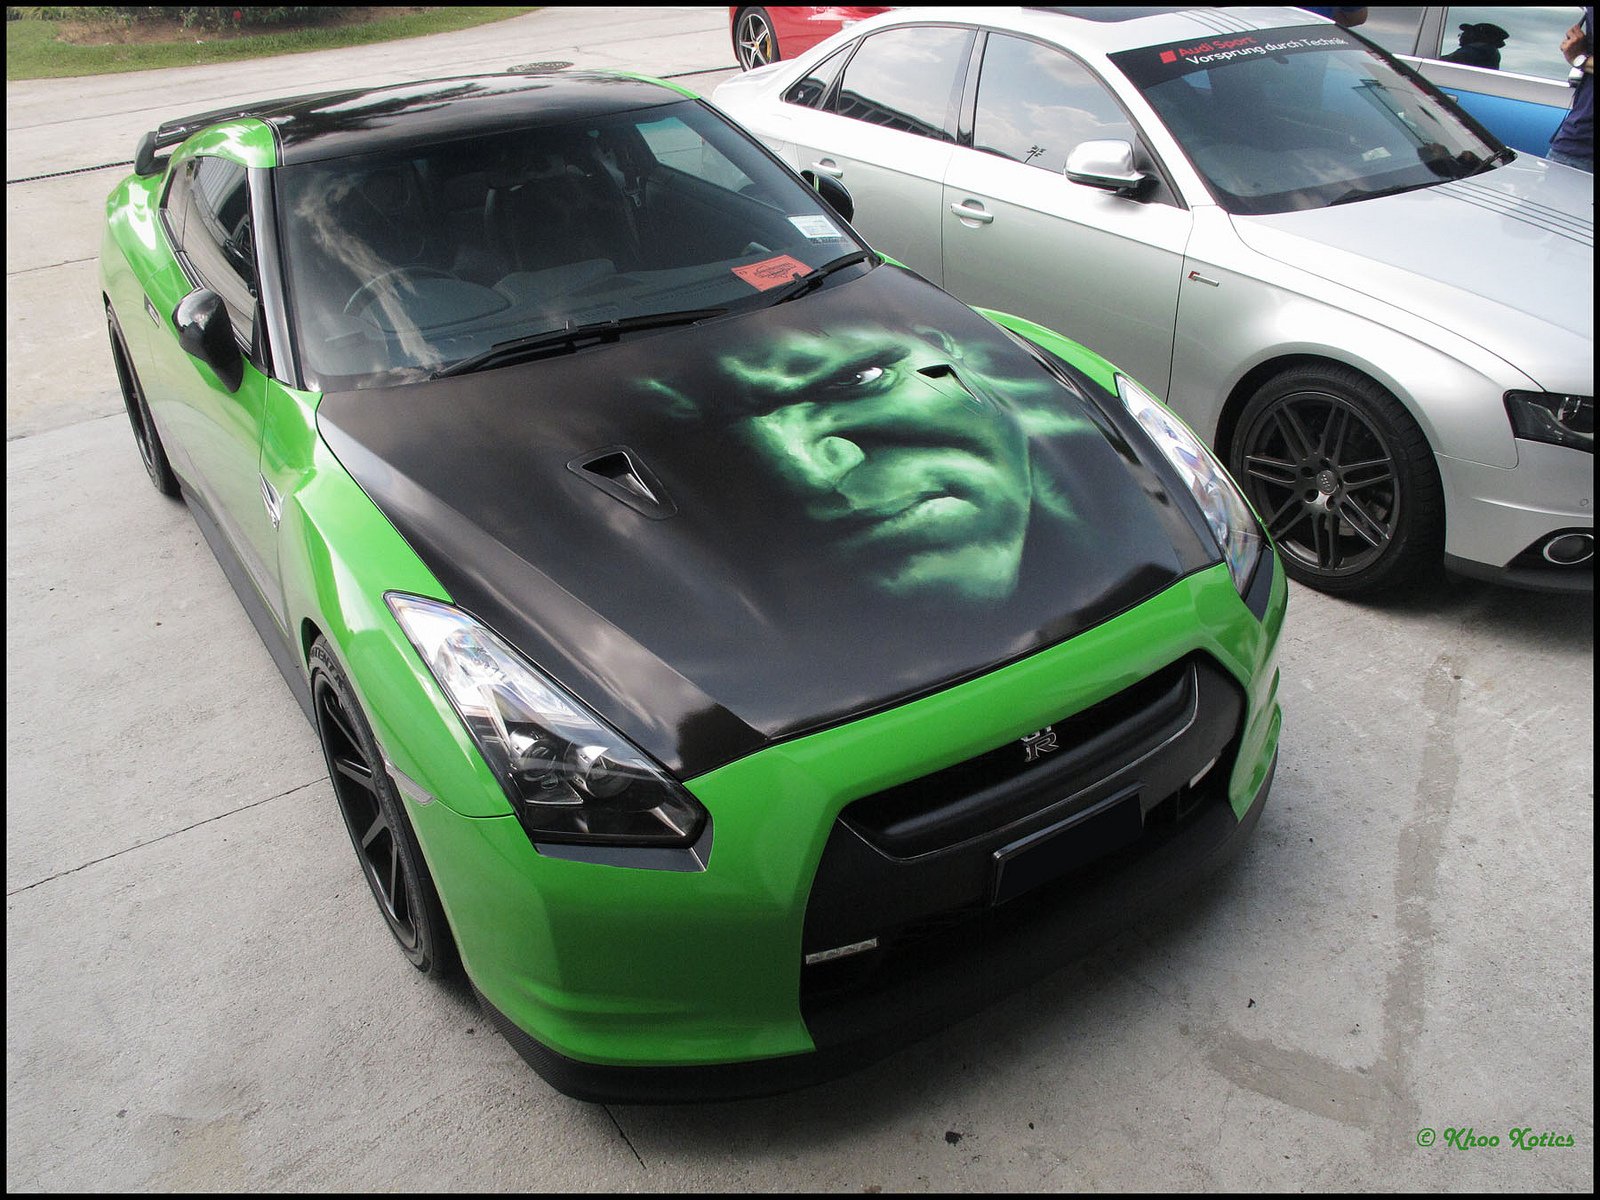 gt r, Nismo, Nissan, R35, Tuning, Supercar, Coupe, Japan, Cars, Green, Verte, Verde Wallpaper